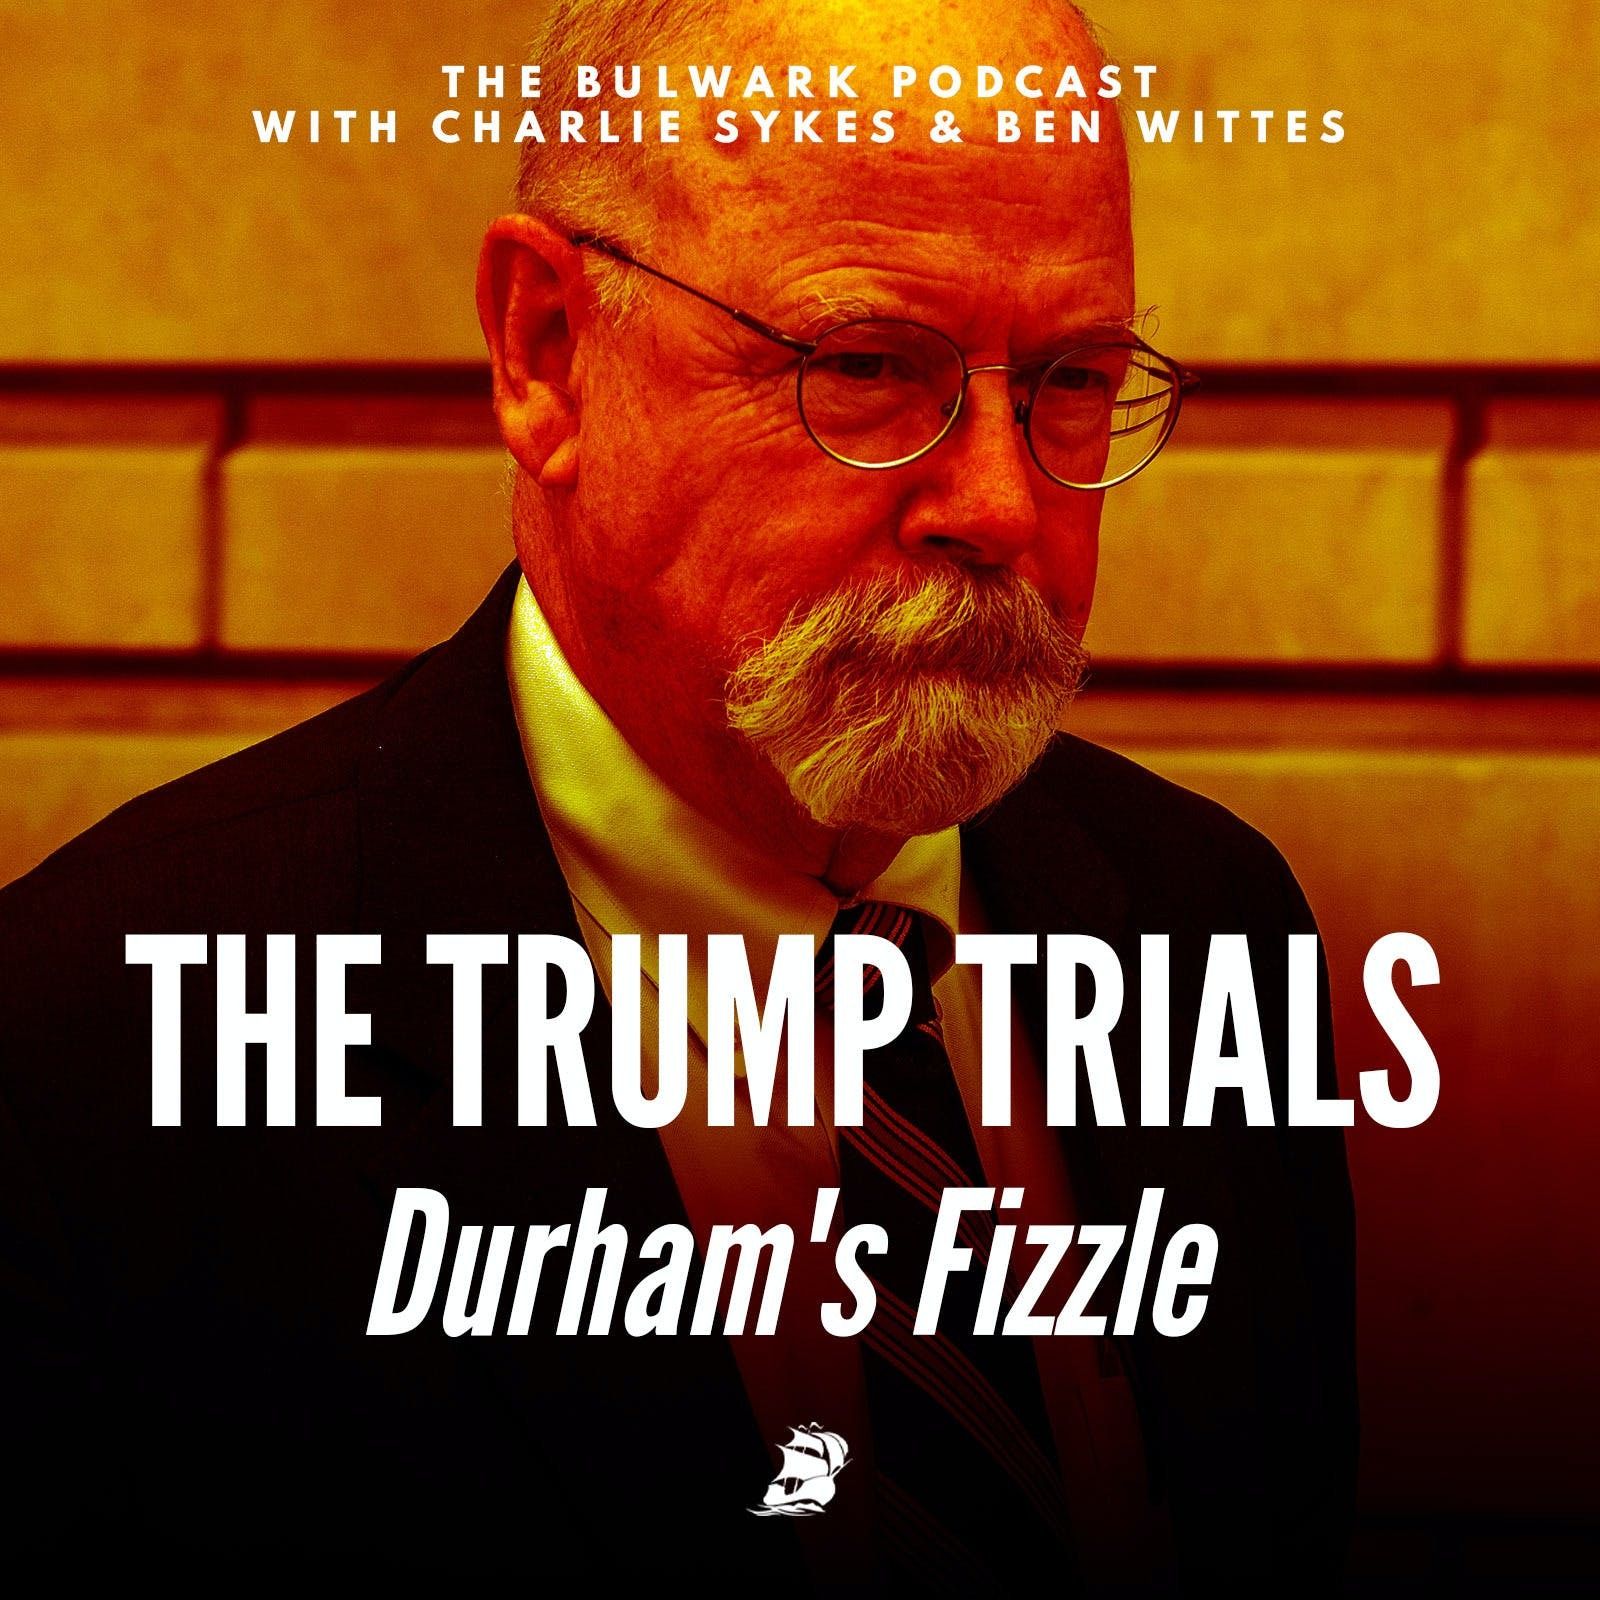 Durham's Fizzle by The Bulwark Podcast